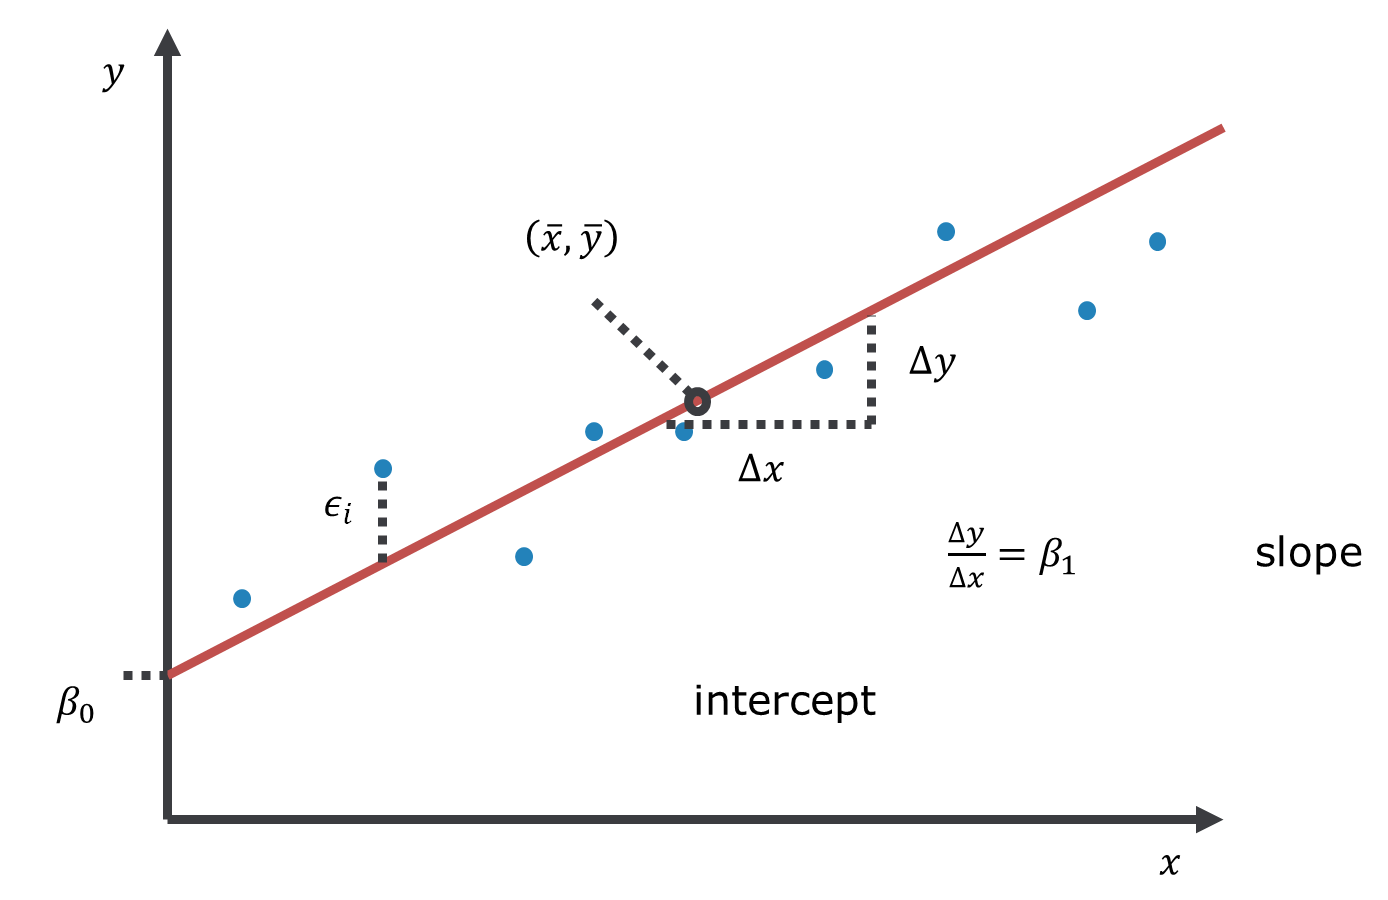 Linear model with one predictor variable (linear regression).